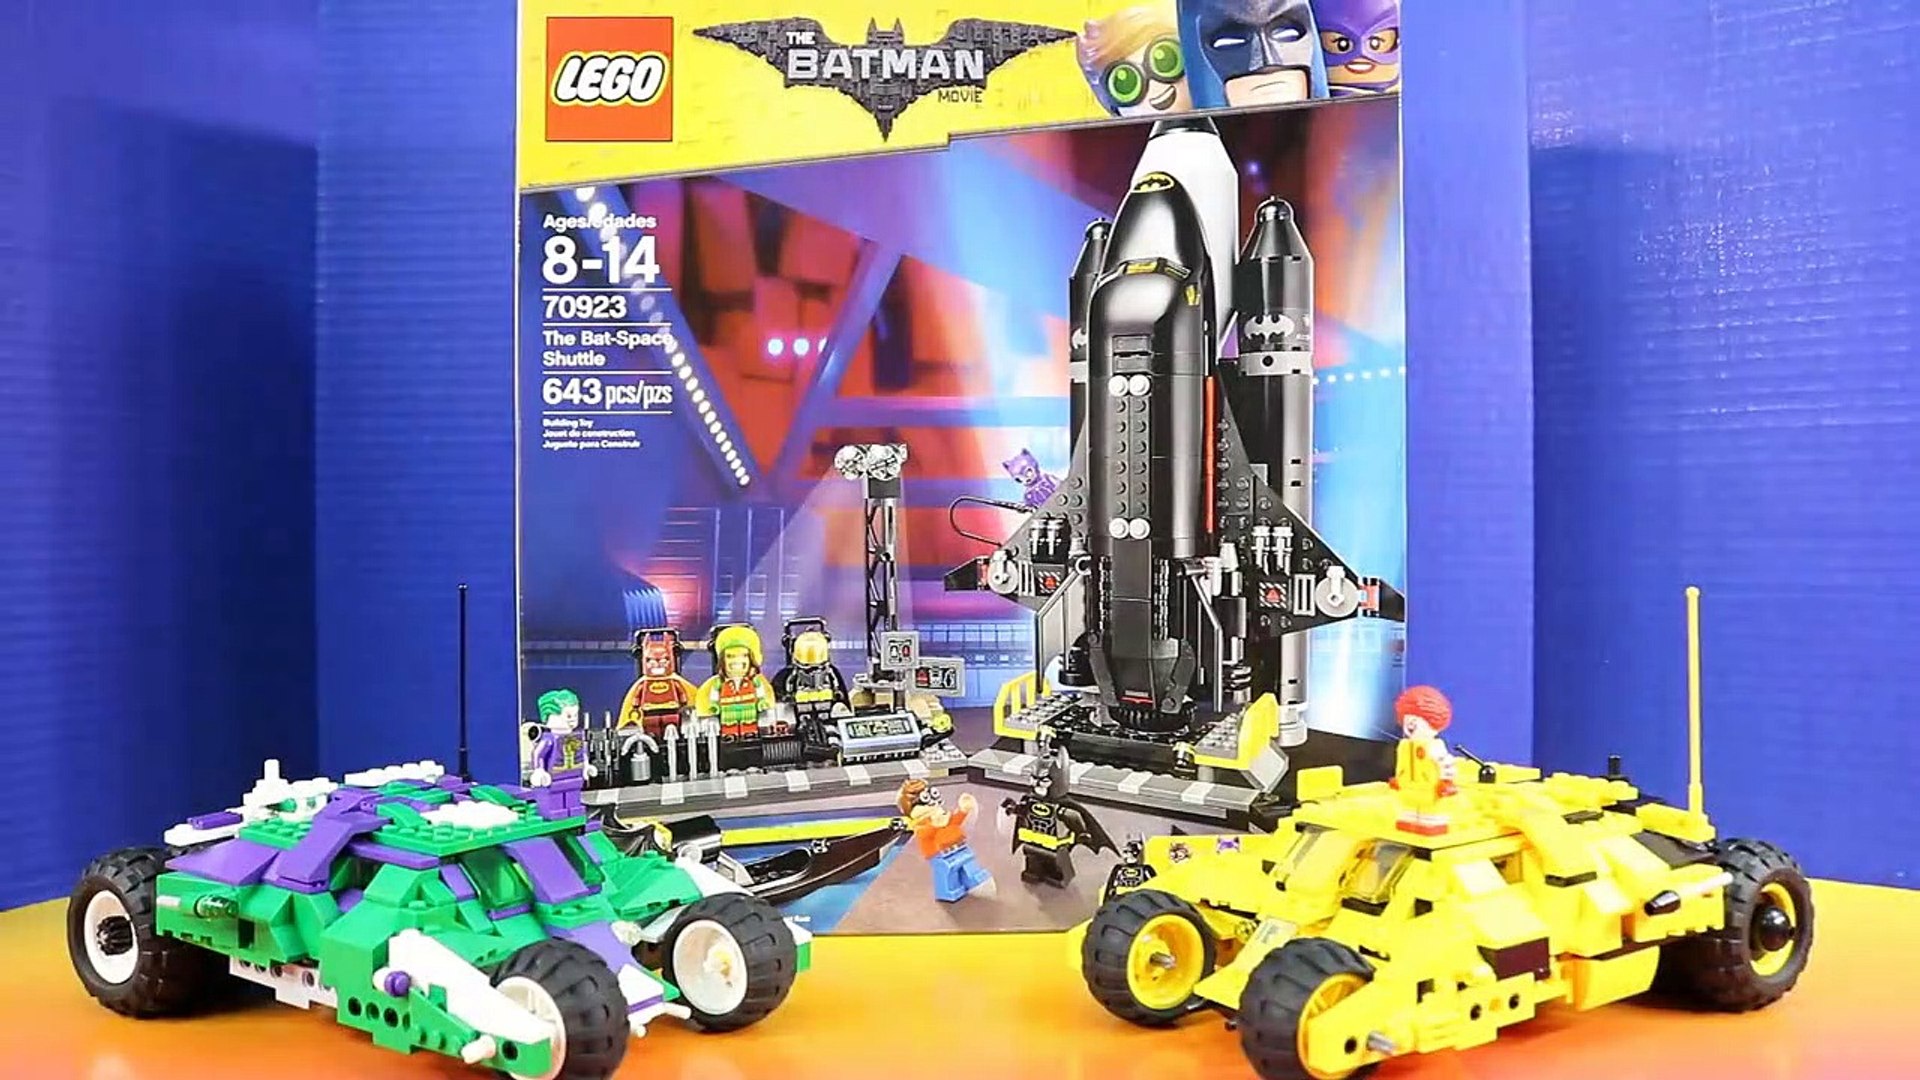 Lego Batman Movie The Bat Space Shuttle Toy Review With Minifigures - video  Dailymotion